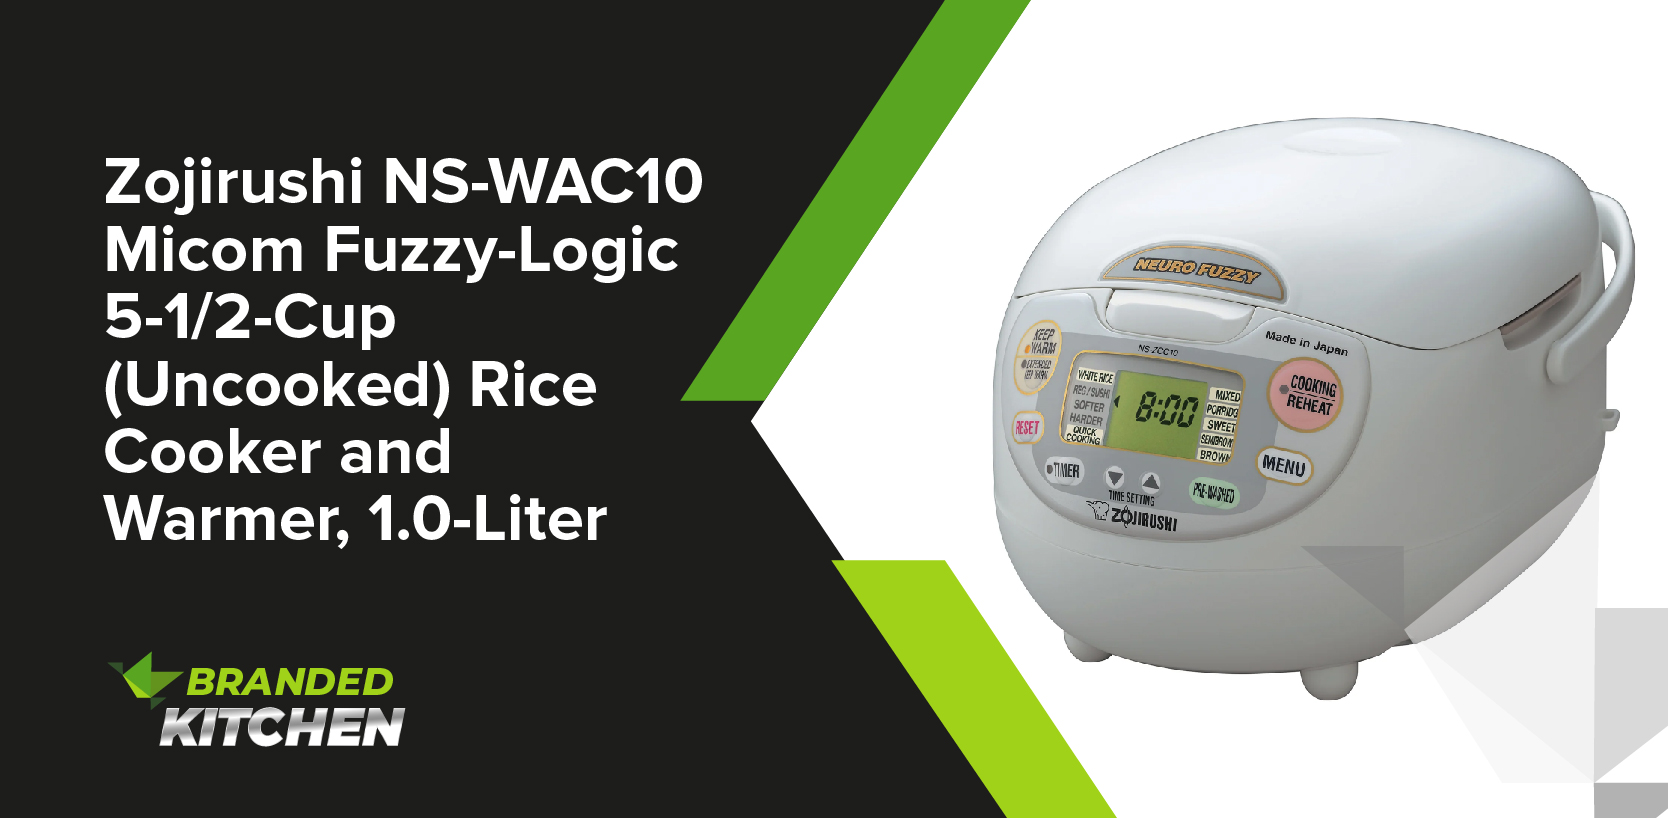 Zojirushi NS-WAC10 Micom Fuzzy-Logic 5-1/2-Cup (Uncooked) Rice Cooker and Warmer, 1.0-Liter